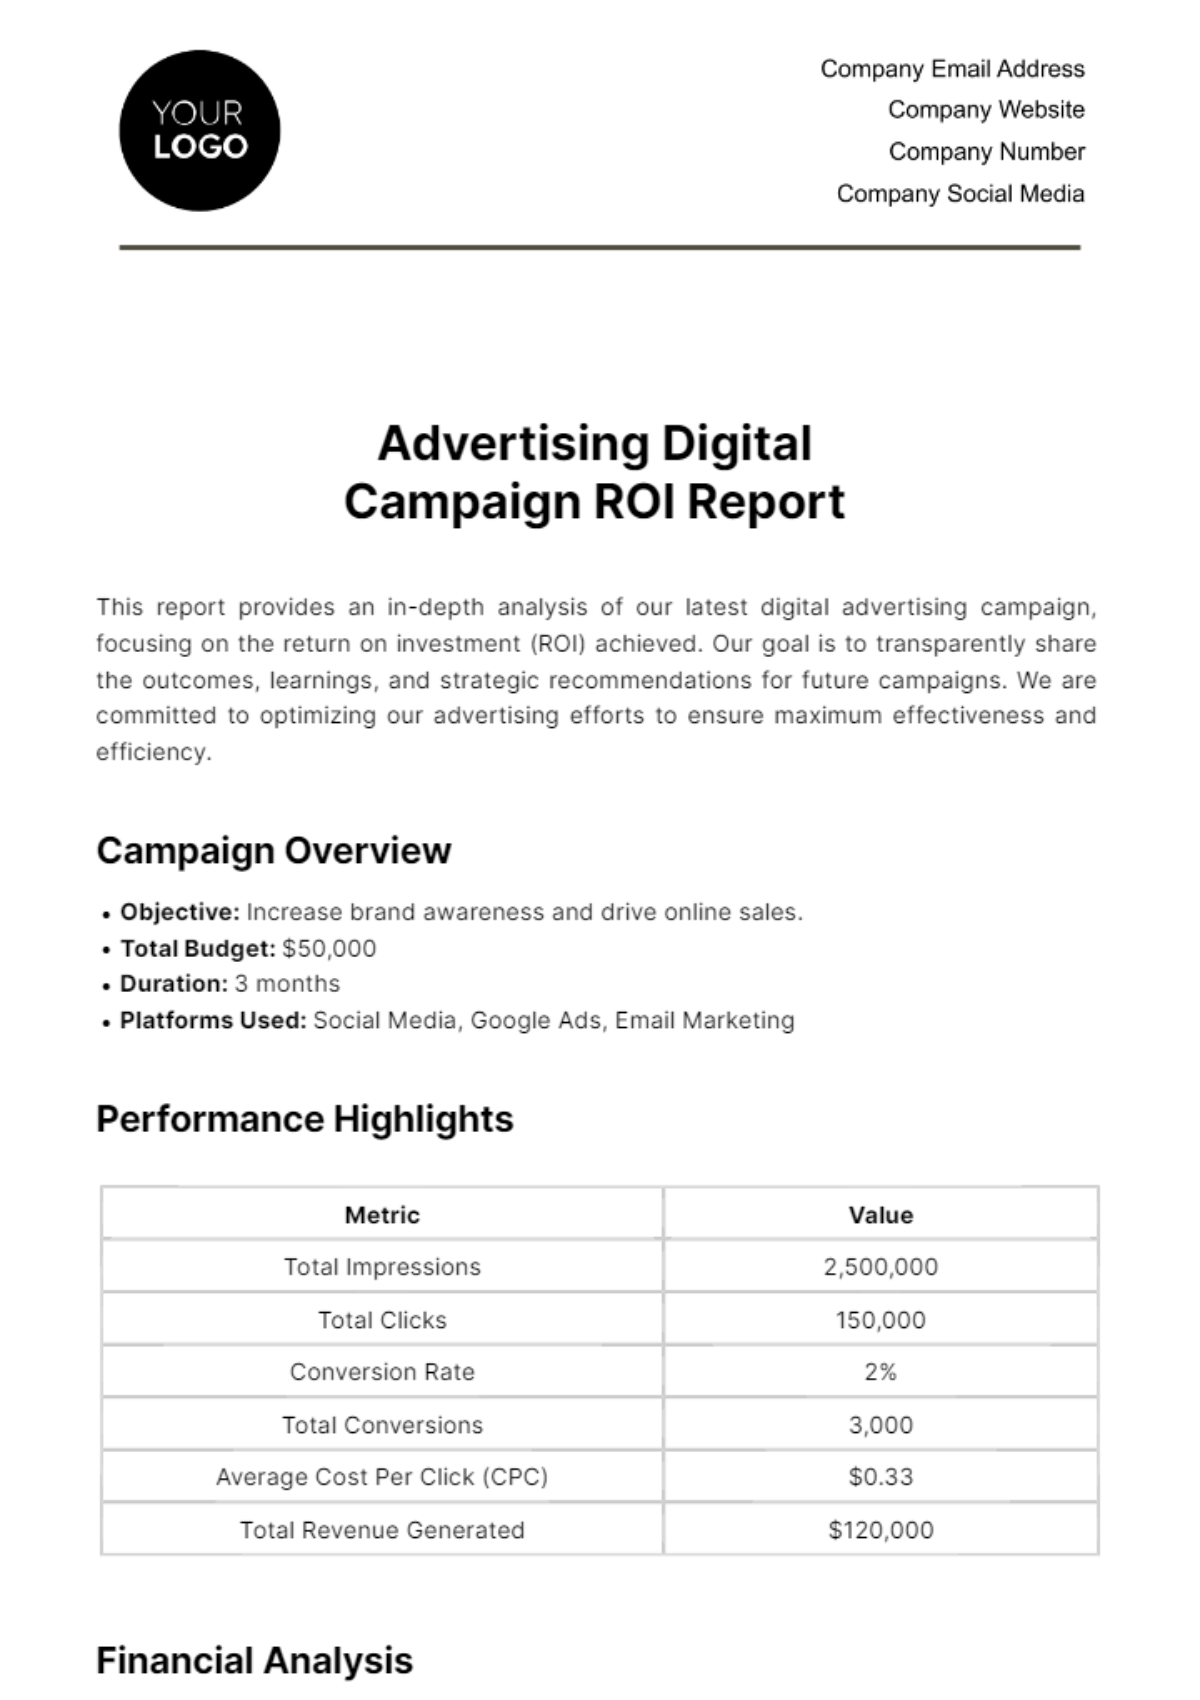 Free Advertising Digital Campaign ROI Report Template